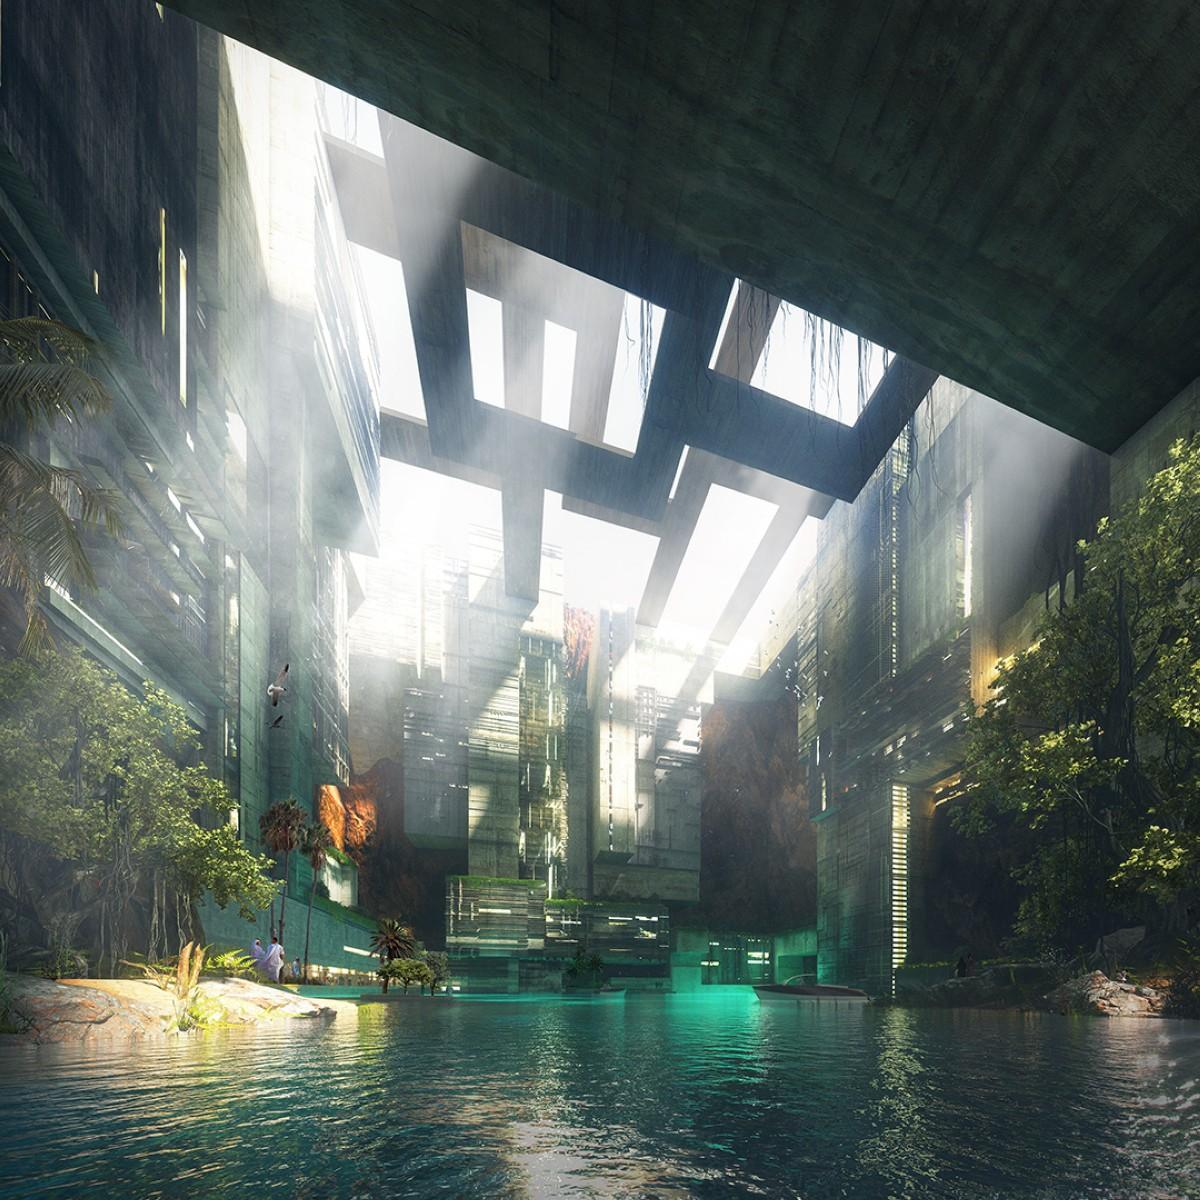 NEOM Newest Project: A floating marina with subterranean, meta-centric community hidden in the mountains